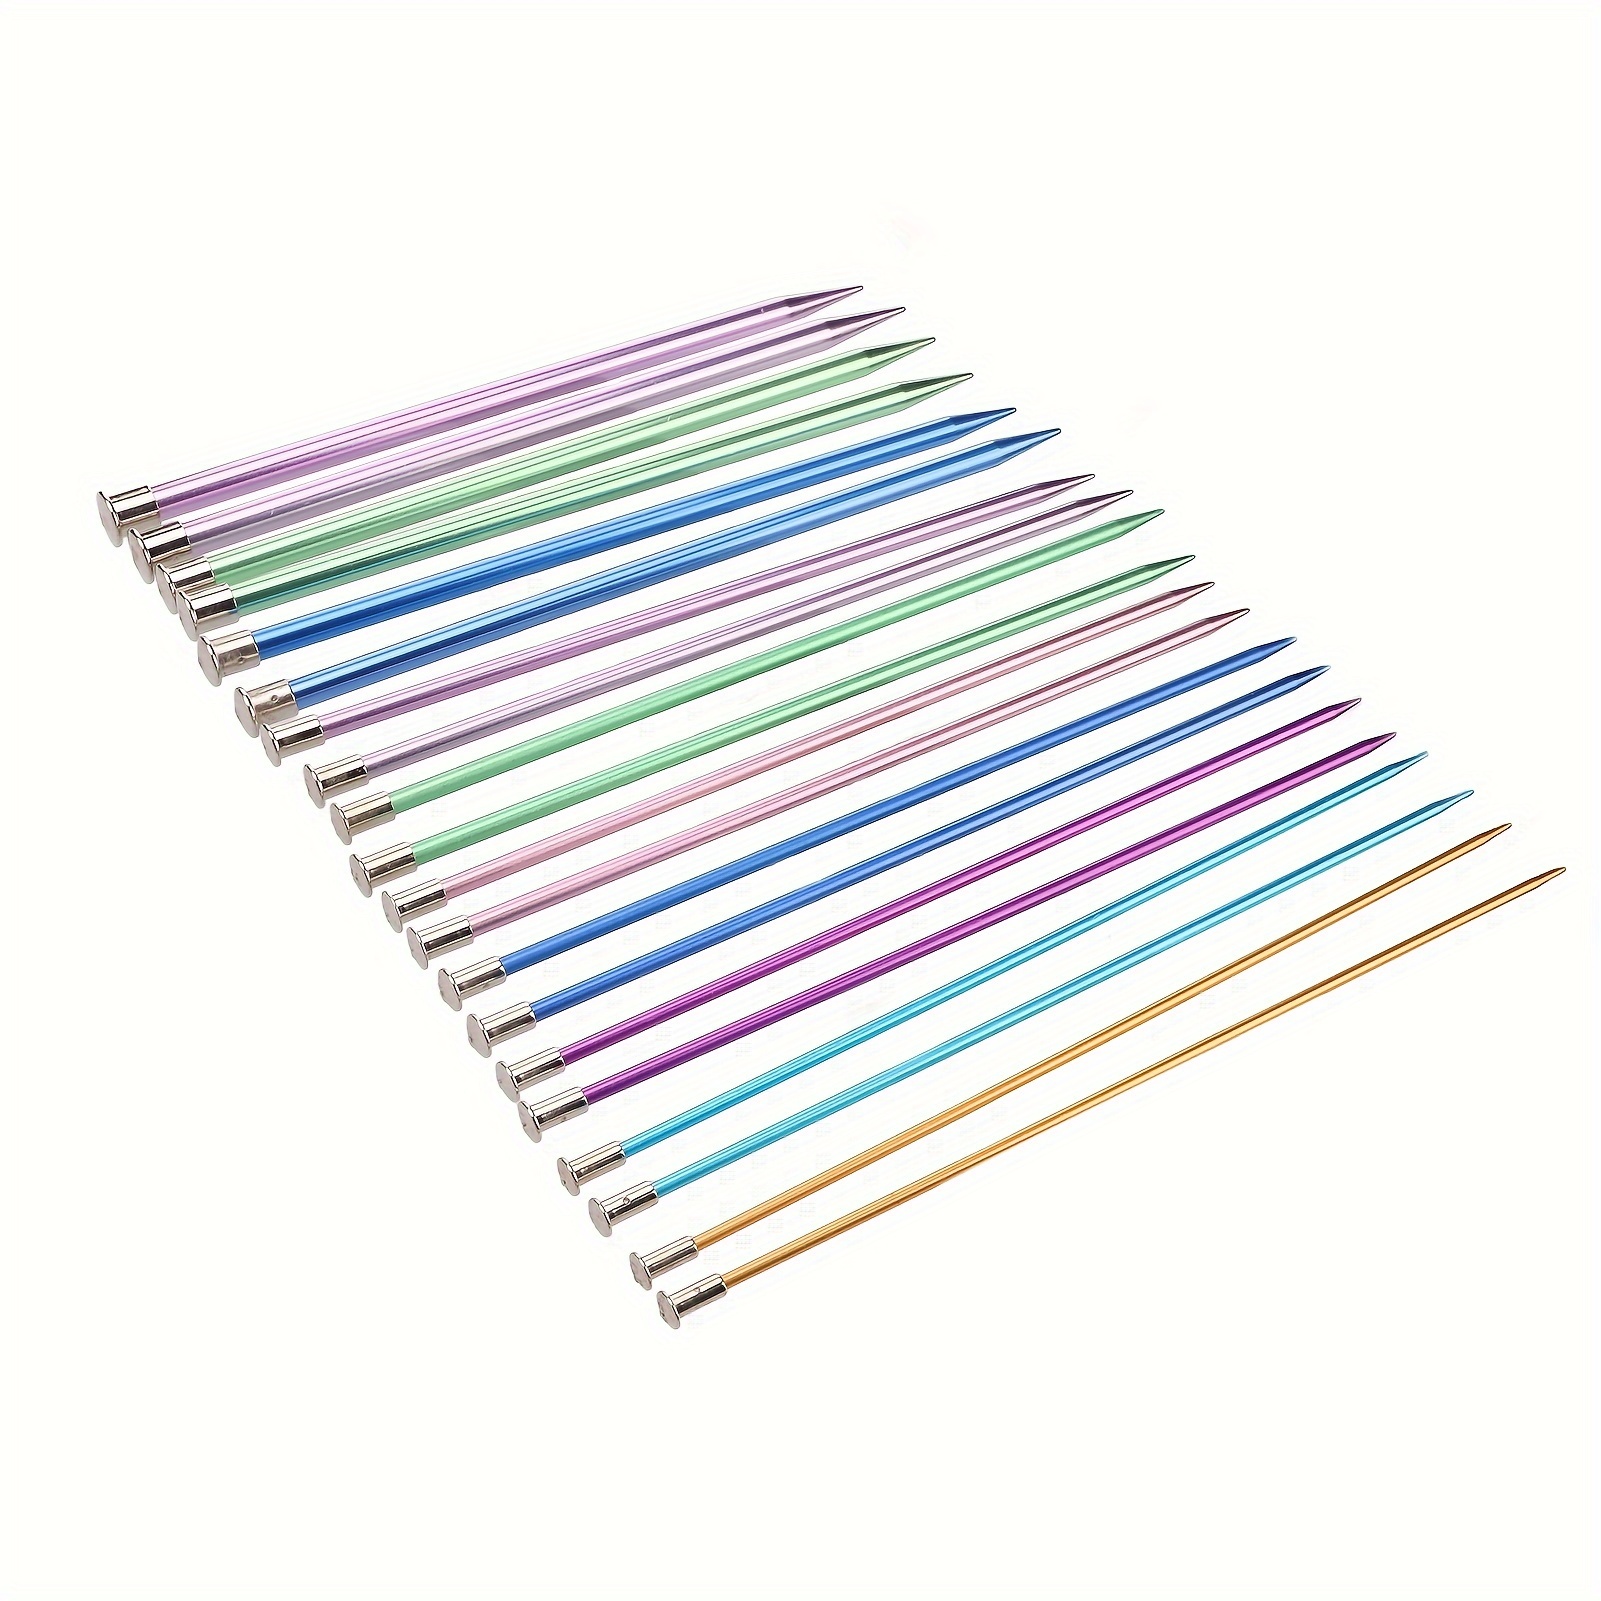 

10in Knitting Needles Set, 25cm Single Pointed Colored Ultra Light Knitting Accessories Various Sizes Available Aluminum Knitting Supplies 3mm-10mm